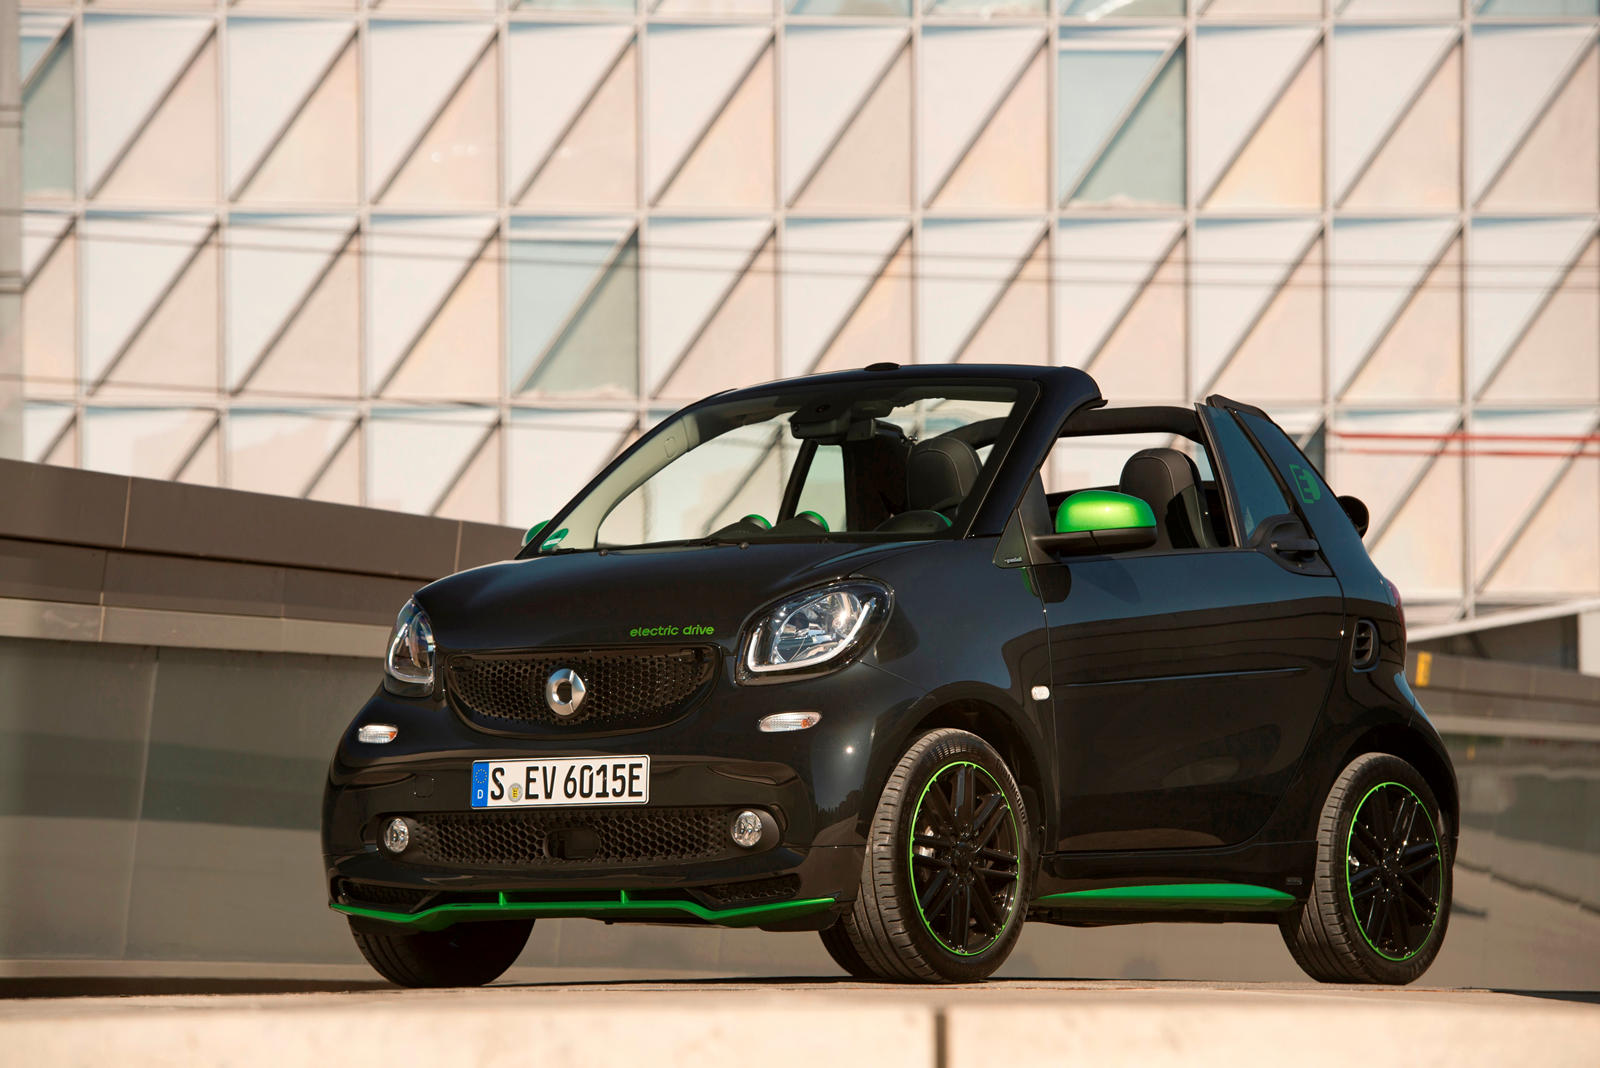 2015 Smart fortwo, Specifications - Car Specs